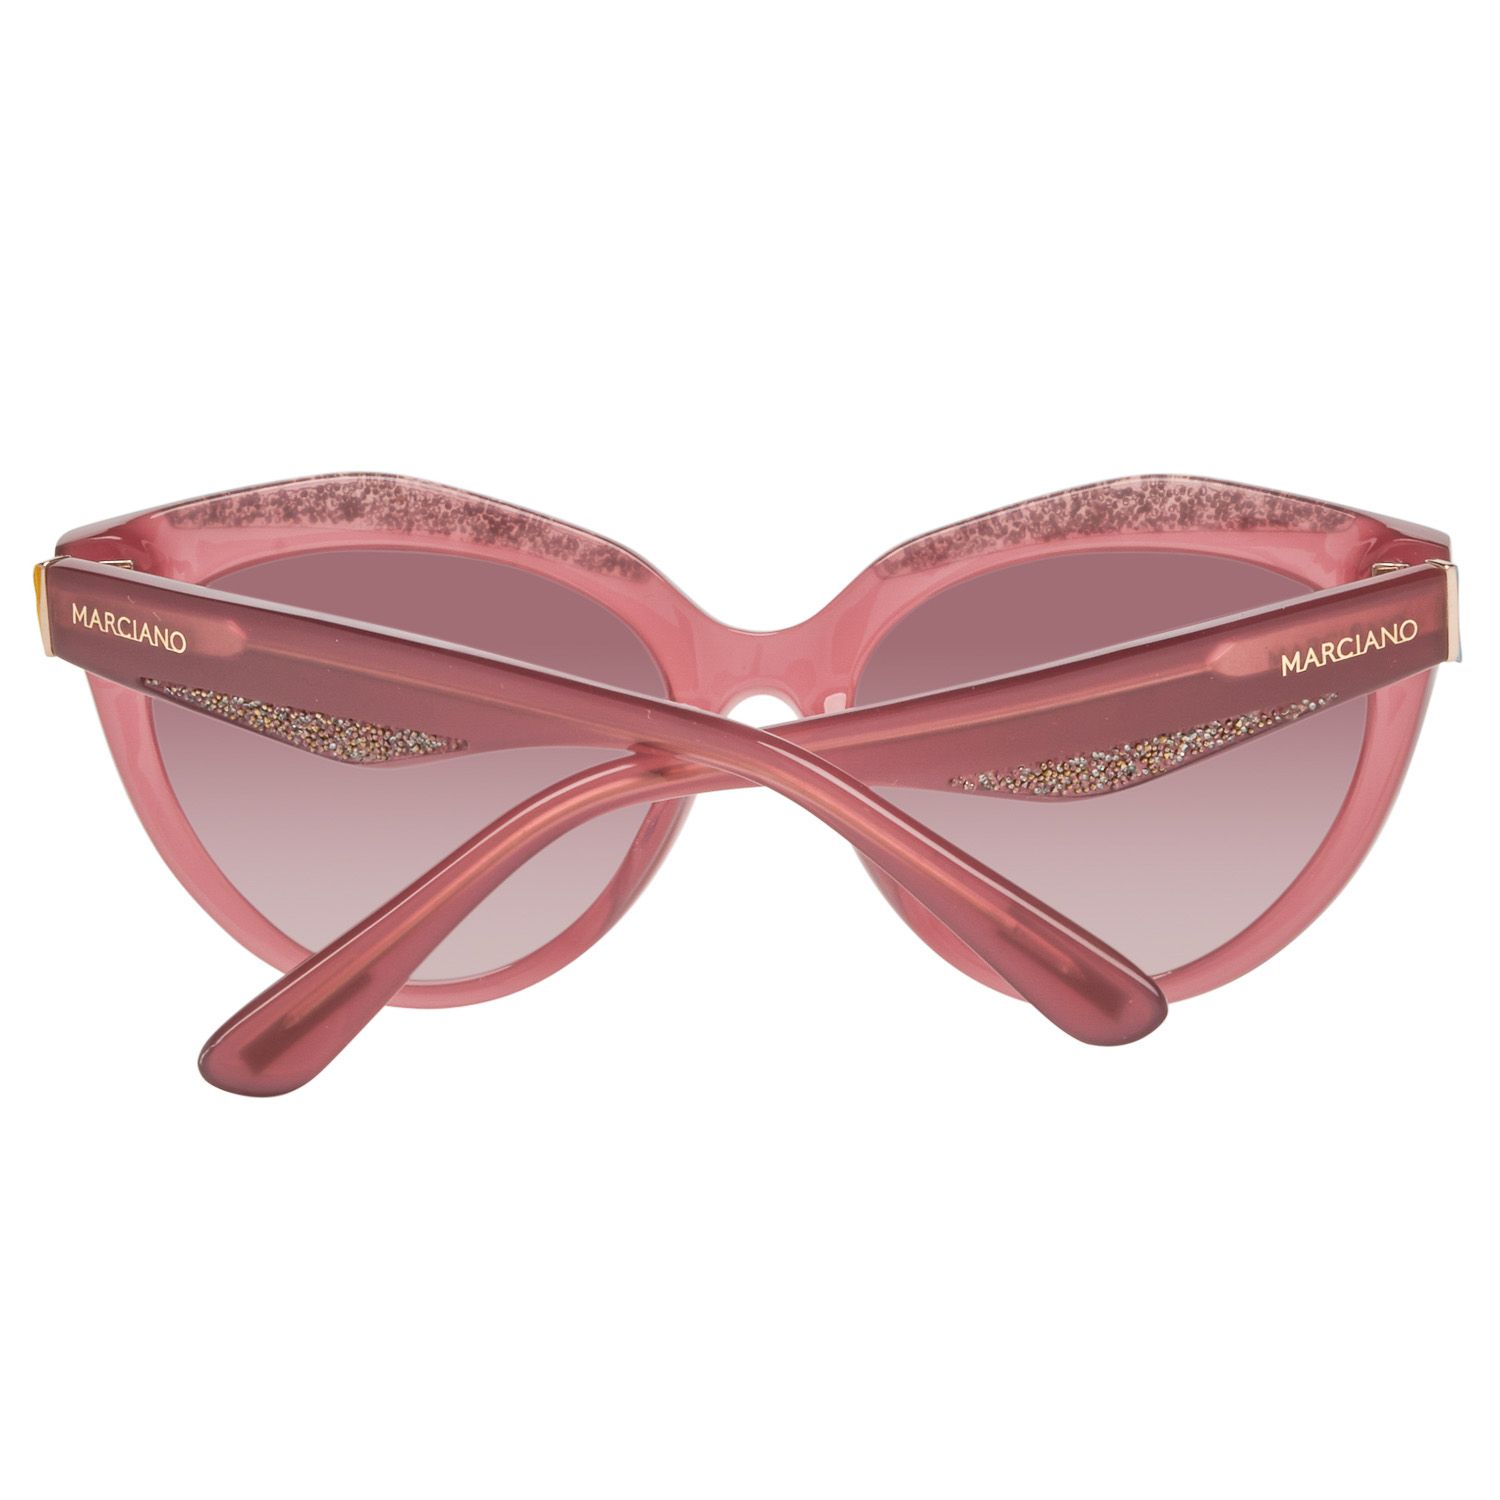 Guess by Marciano Sunglasses GM0776 75F 56
Frame color: Pink
Lenses color: Brown
Lenses material: Plastic
Filter category: 3
Style: Butterfly
Lenses effect: Gradient
Protection: 100% UVA & UVB
Lenses width: 56
Lenses height: 44
Bridge width: 18
Frame width: 142
Temples length: 140
Shipment includes: Case, cleaning cloth, documentation
Spring hinge: No